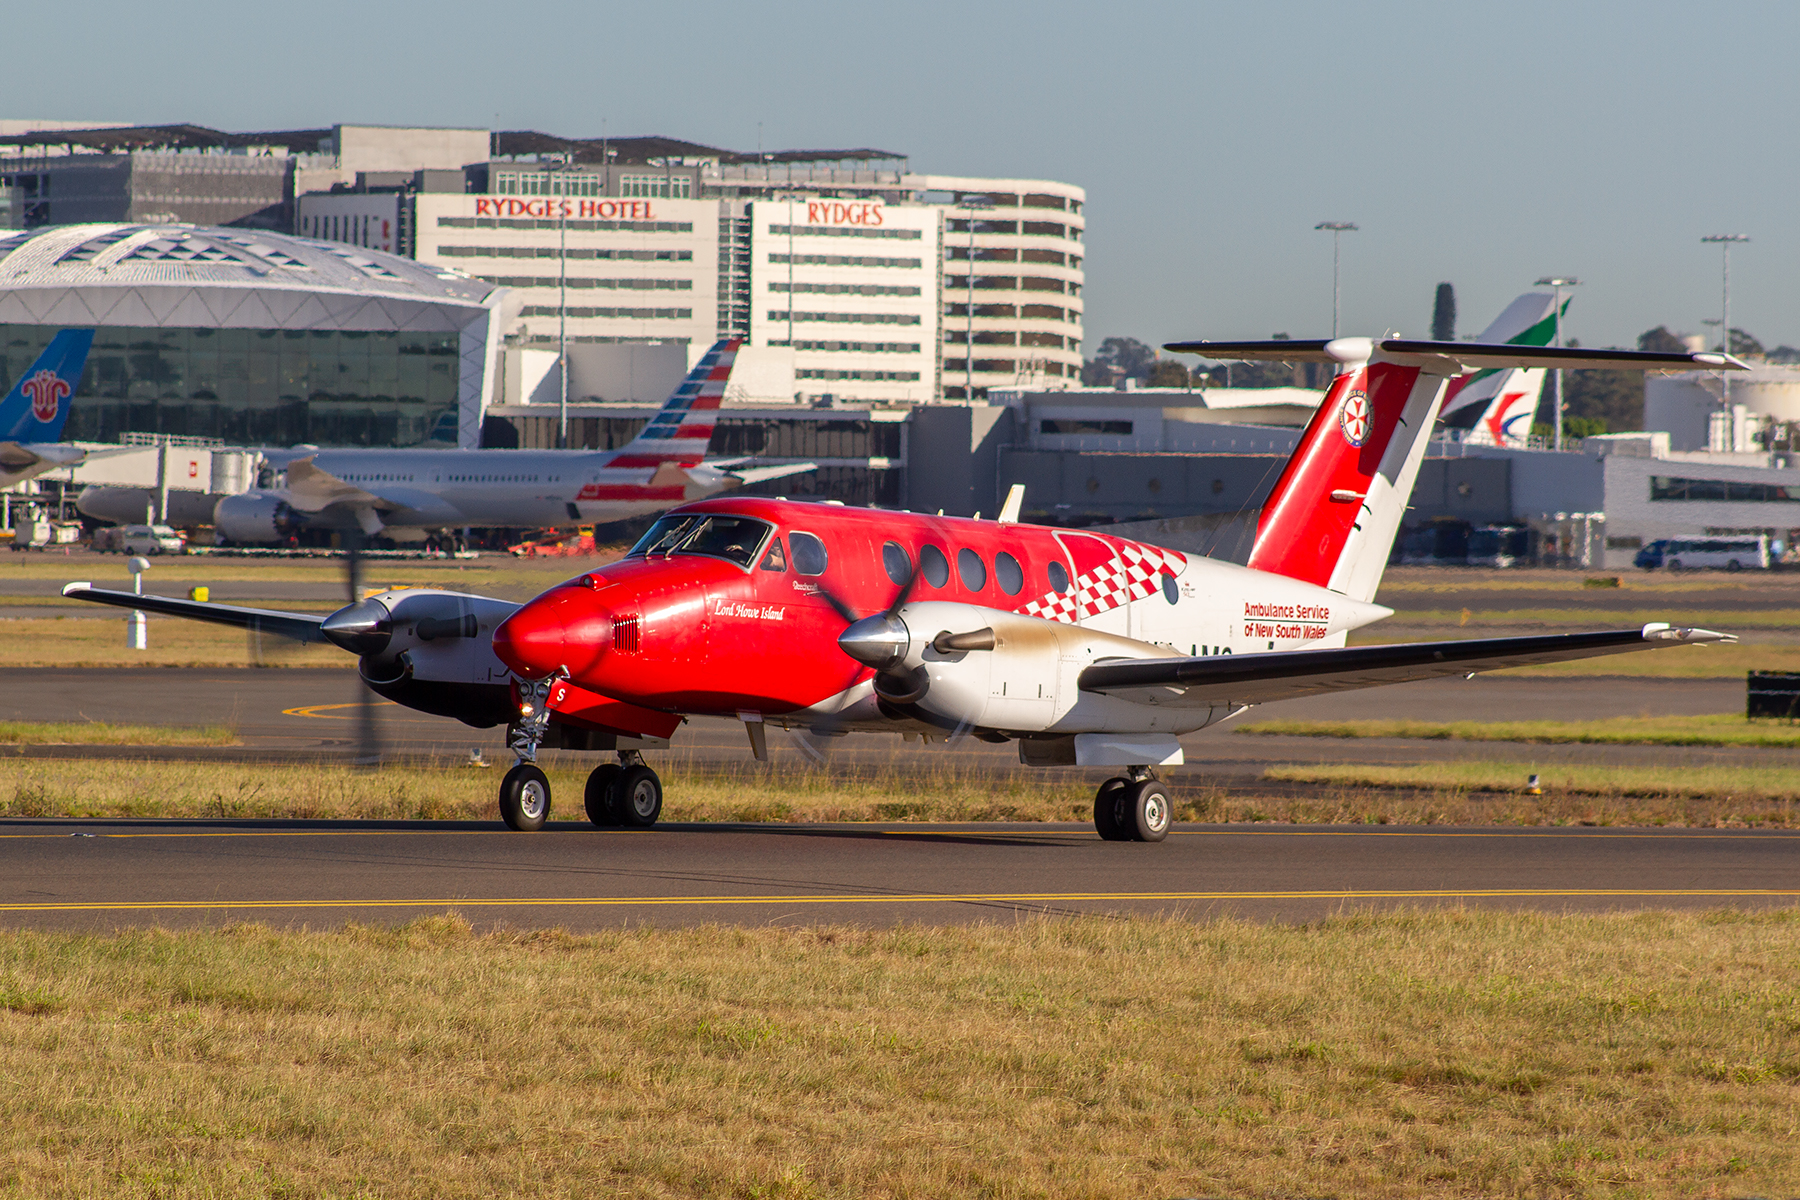 RFDS - Royal Flying Doctor Service (South Eastern Section) Beech King Air 200C VH-AMS at Kingsford Smith